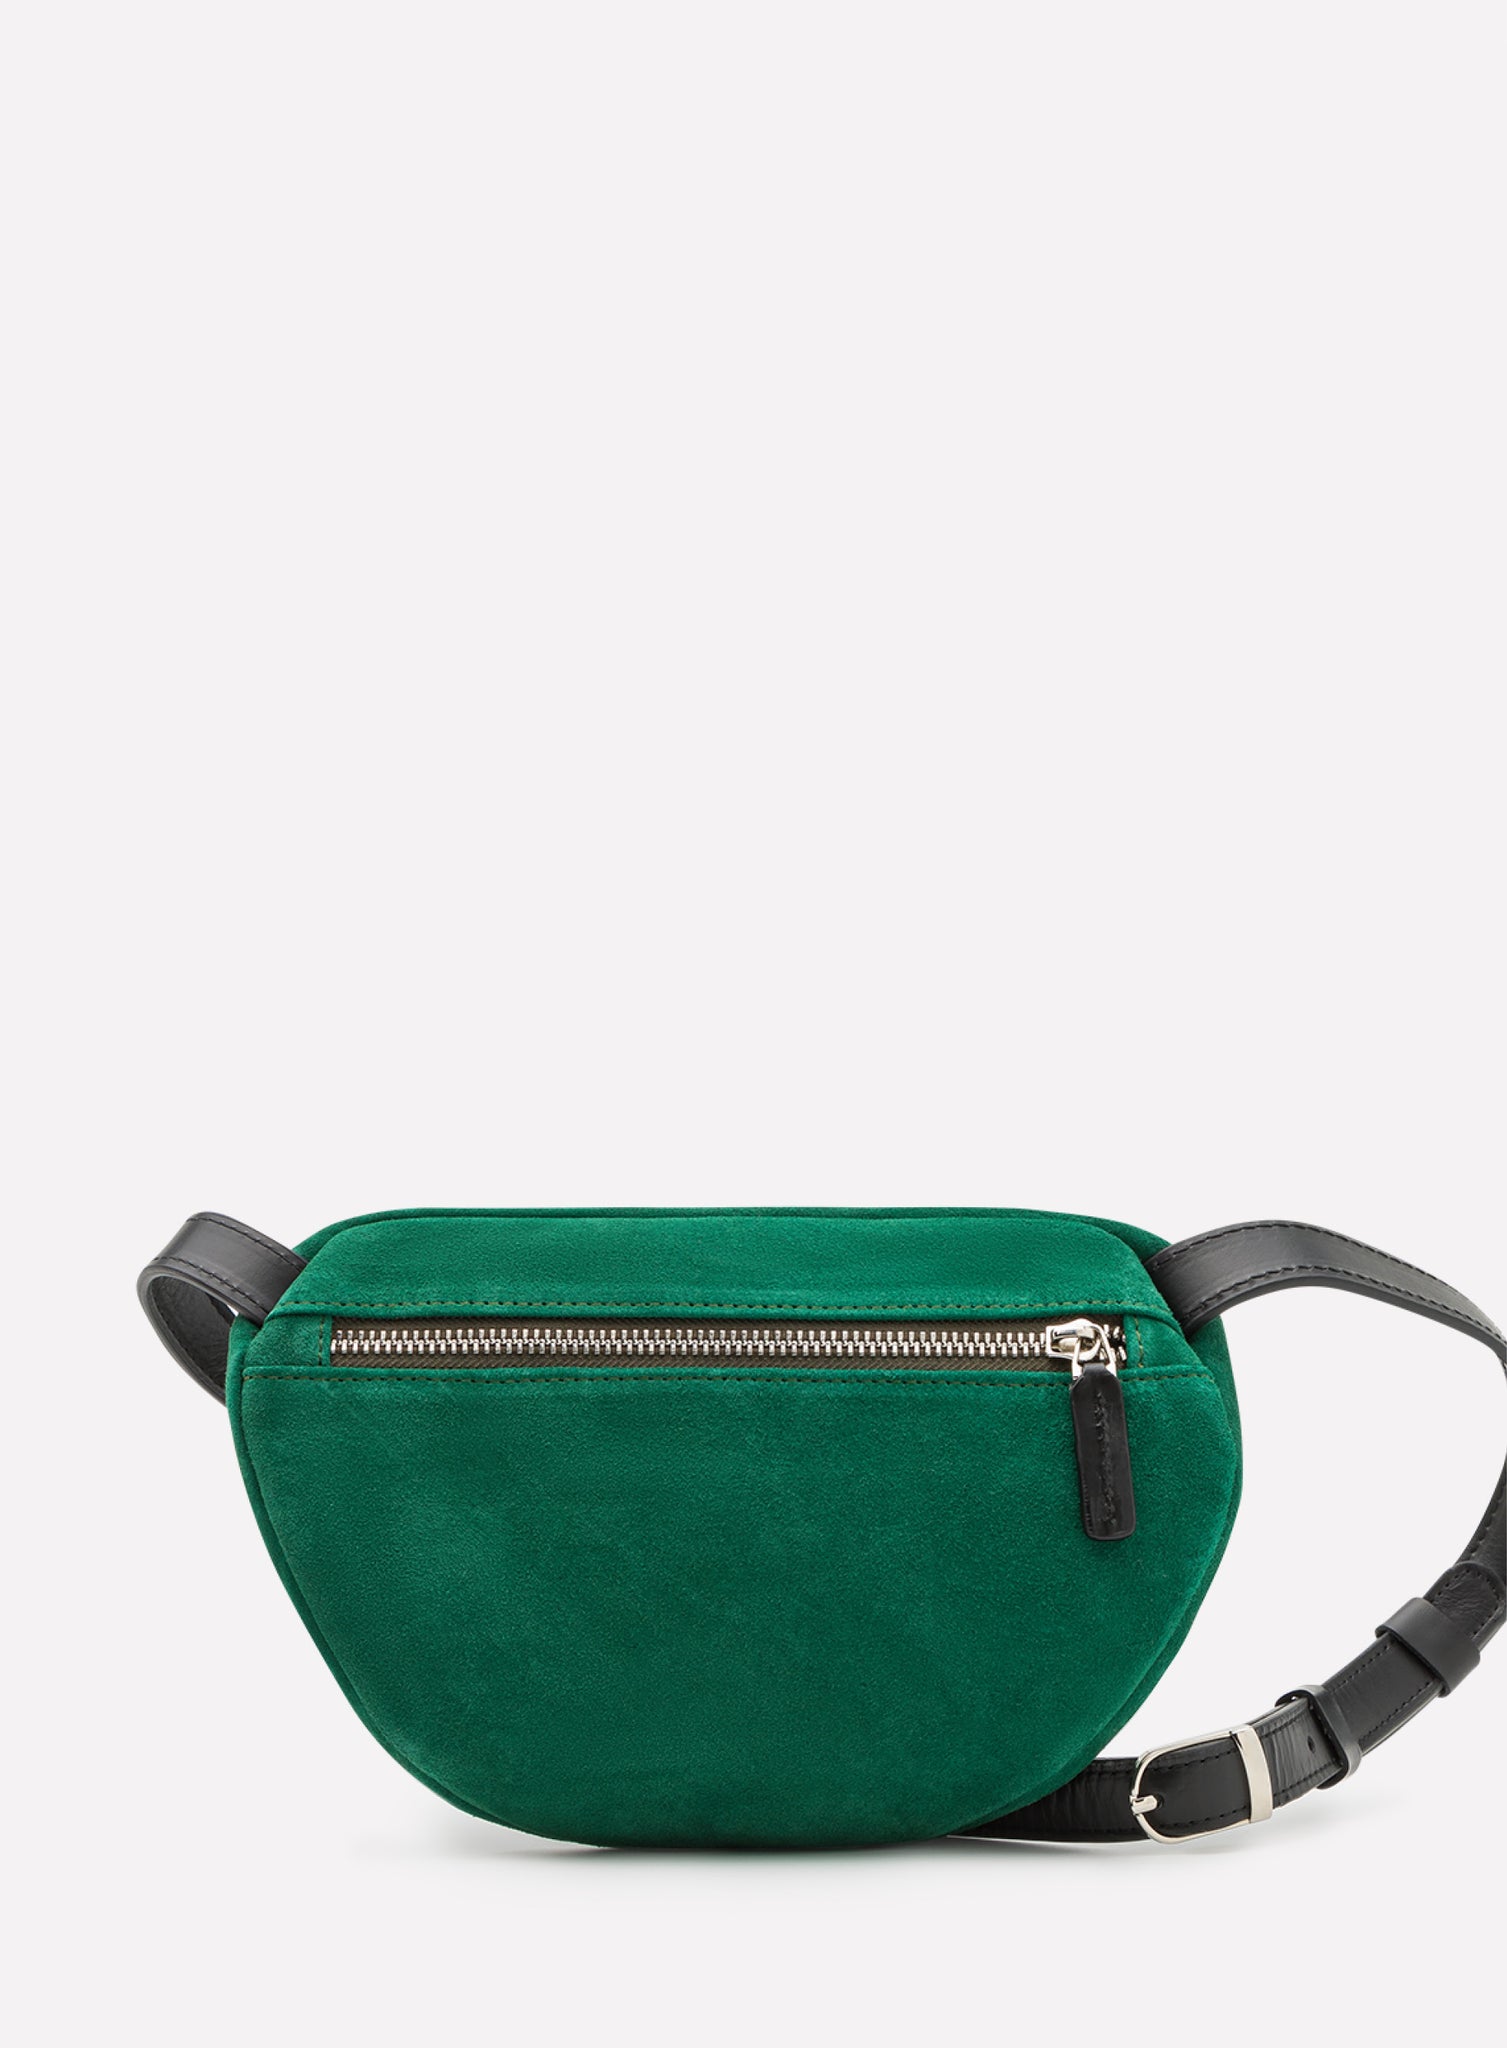 HIP_BAG_CAN_Suede_Green_Designed_in_Berlin_Made_to_last_Handmade_in_Poland.